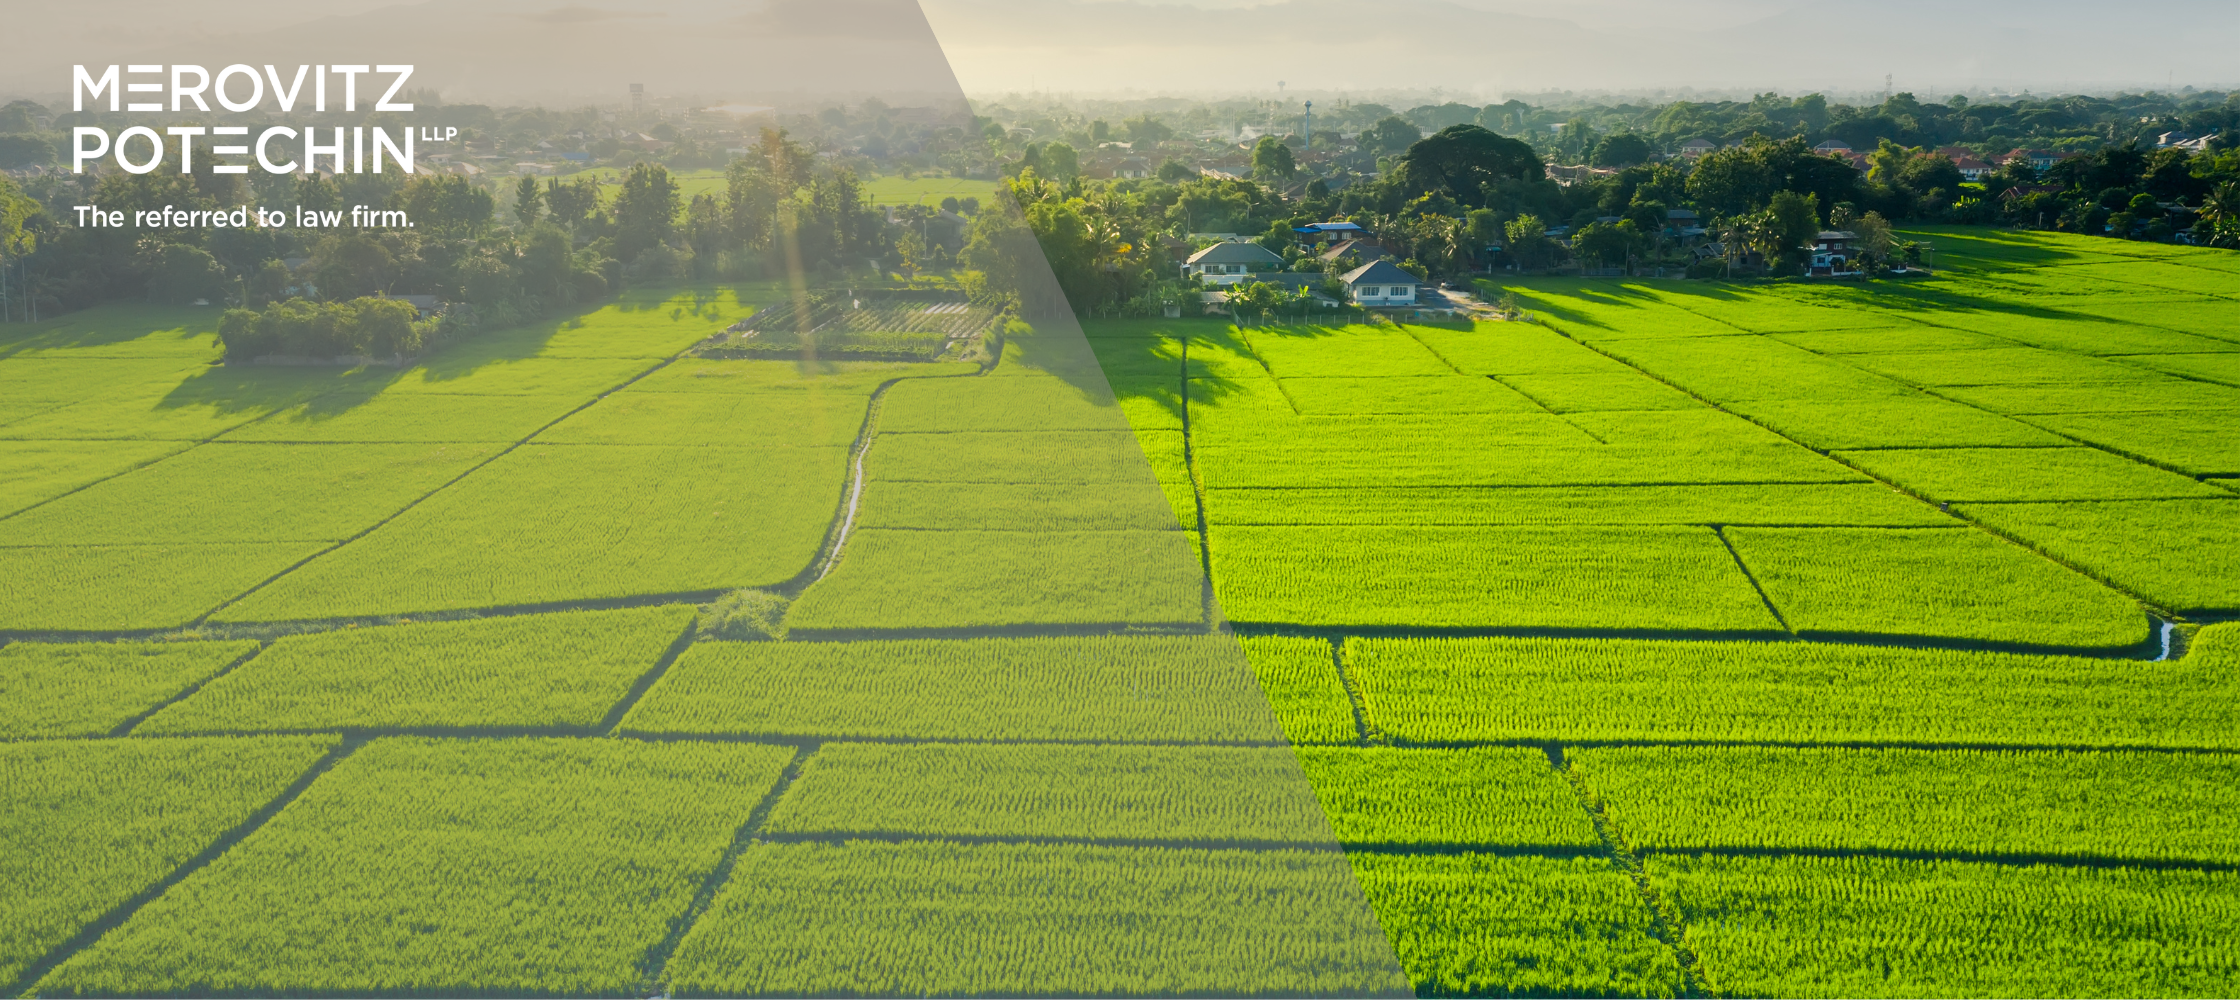 Arial view of green agricultural fields with residential homes in the background, representing land development and property boundaries - Merovitz Potechin LLP, the referred-to law firm.